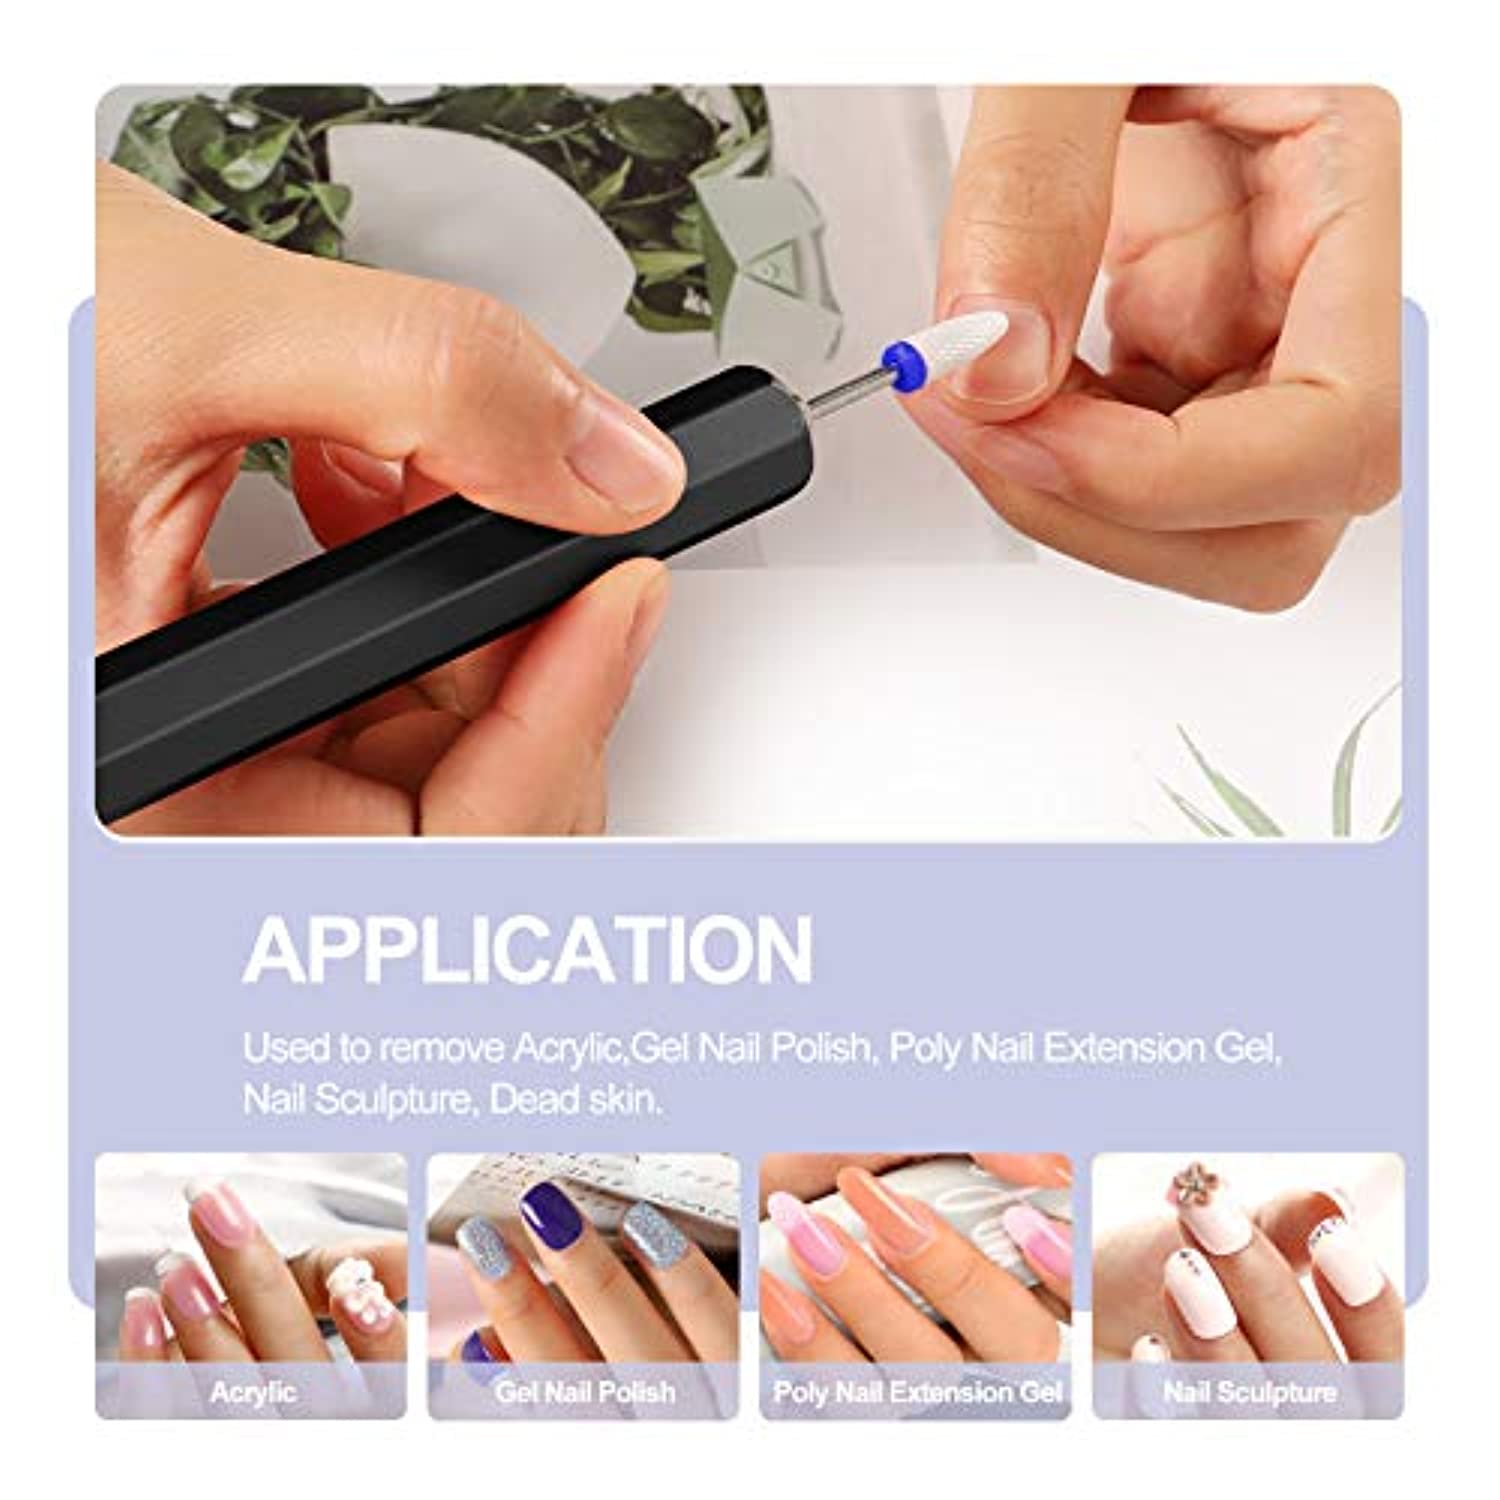 6 Colors Gel Nail Polish Kit with UV Light and Drill for Starter Glitter White Red Gel Nail Polish Set Electric Nail File Kit